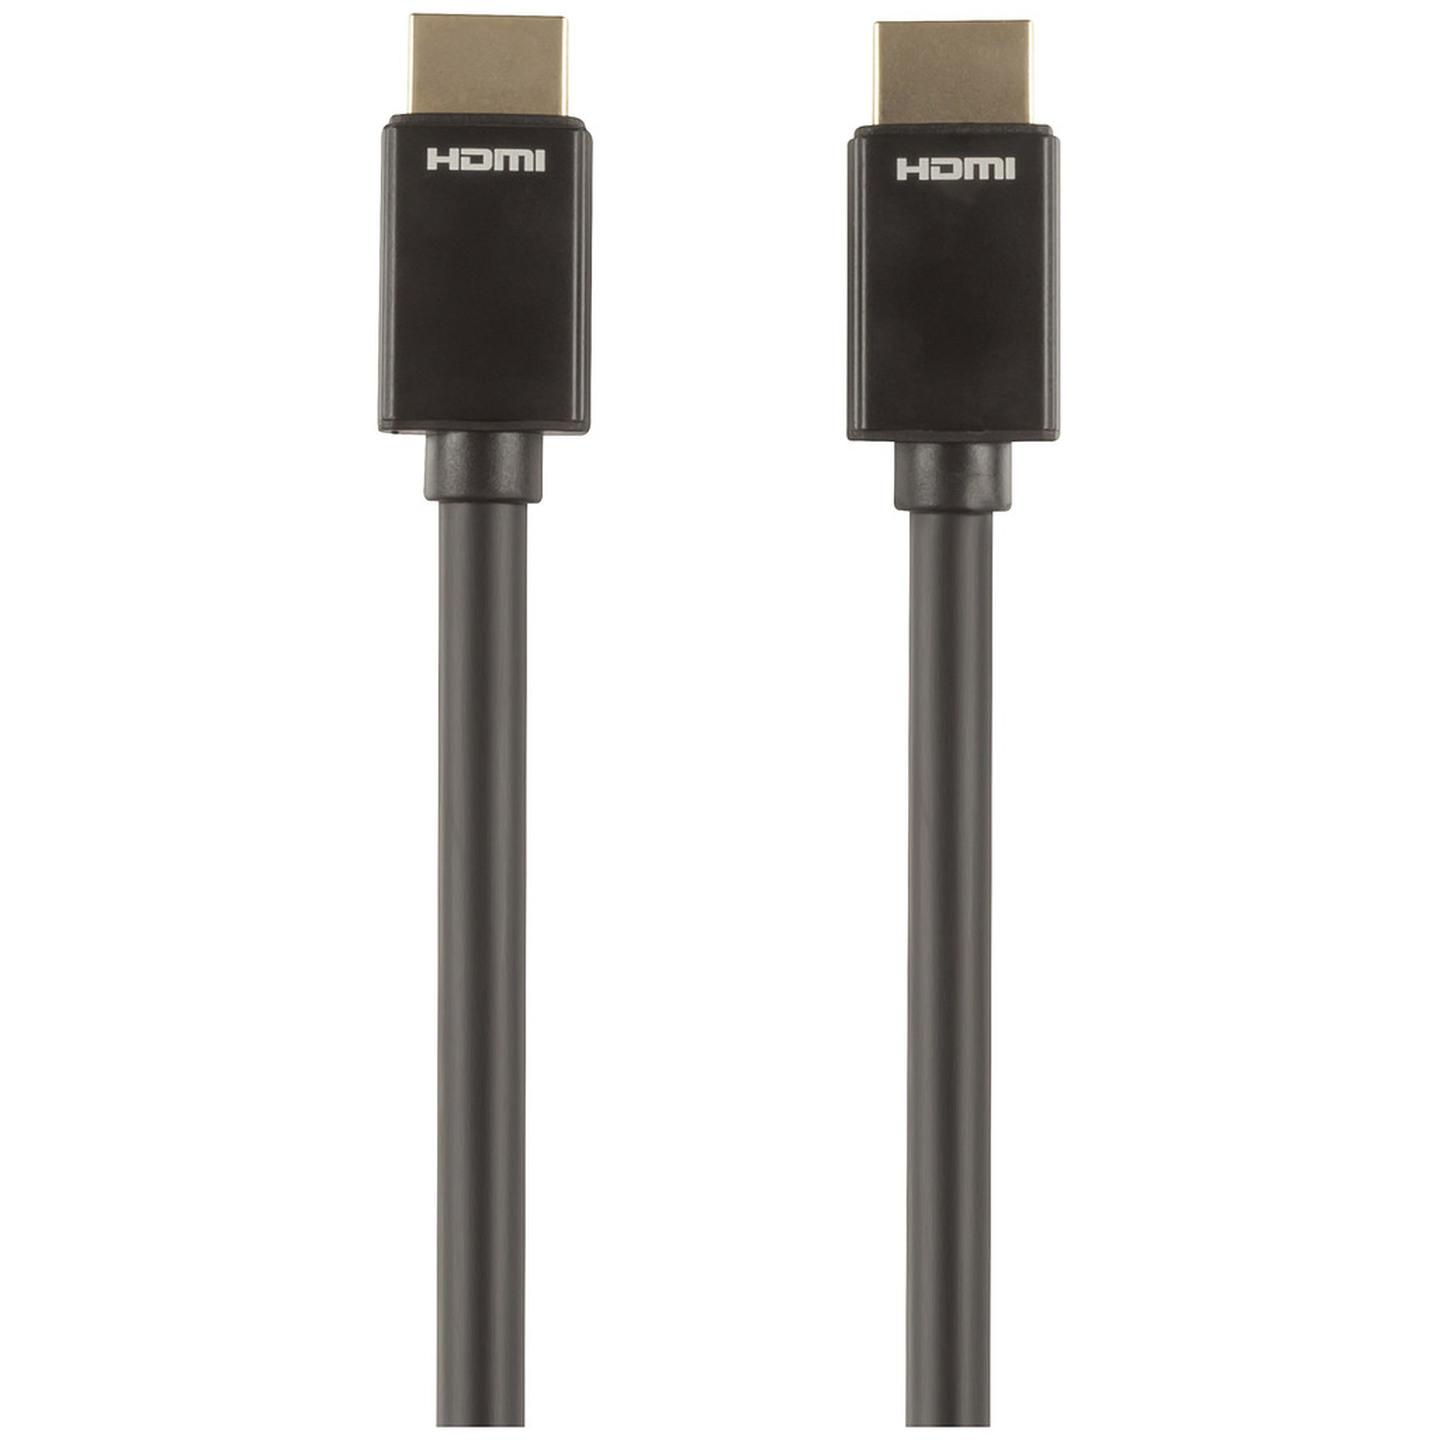 Concord 10m 4K HDMI 2.0 Amplified Cable